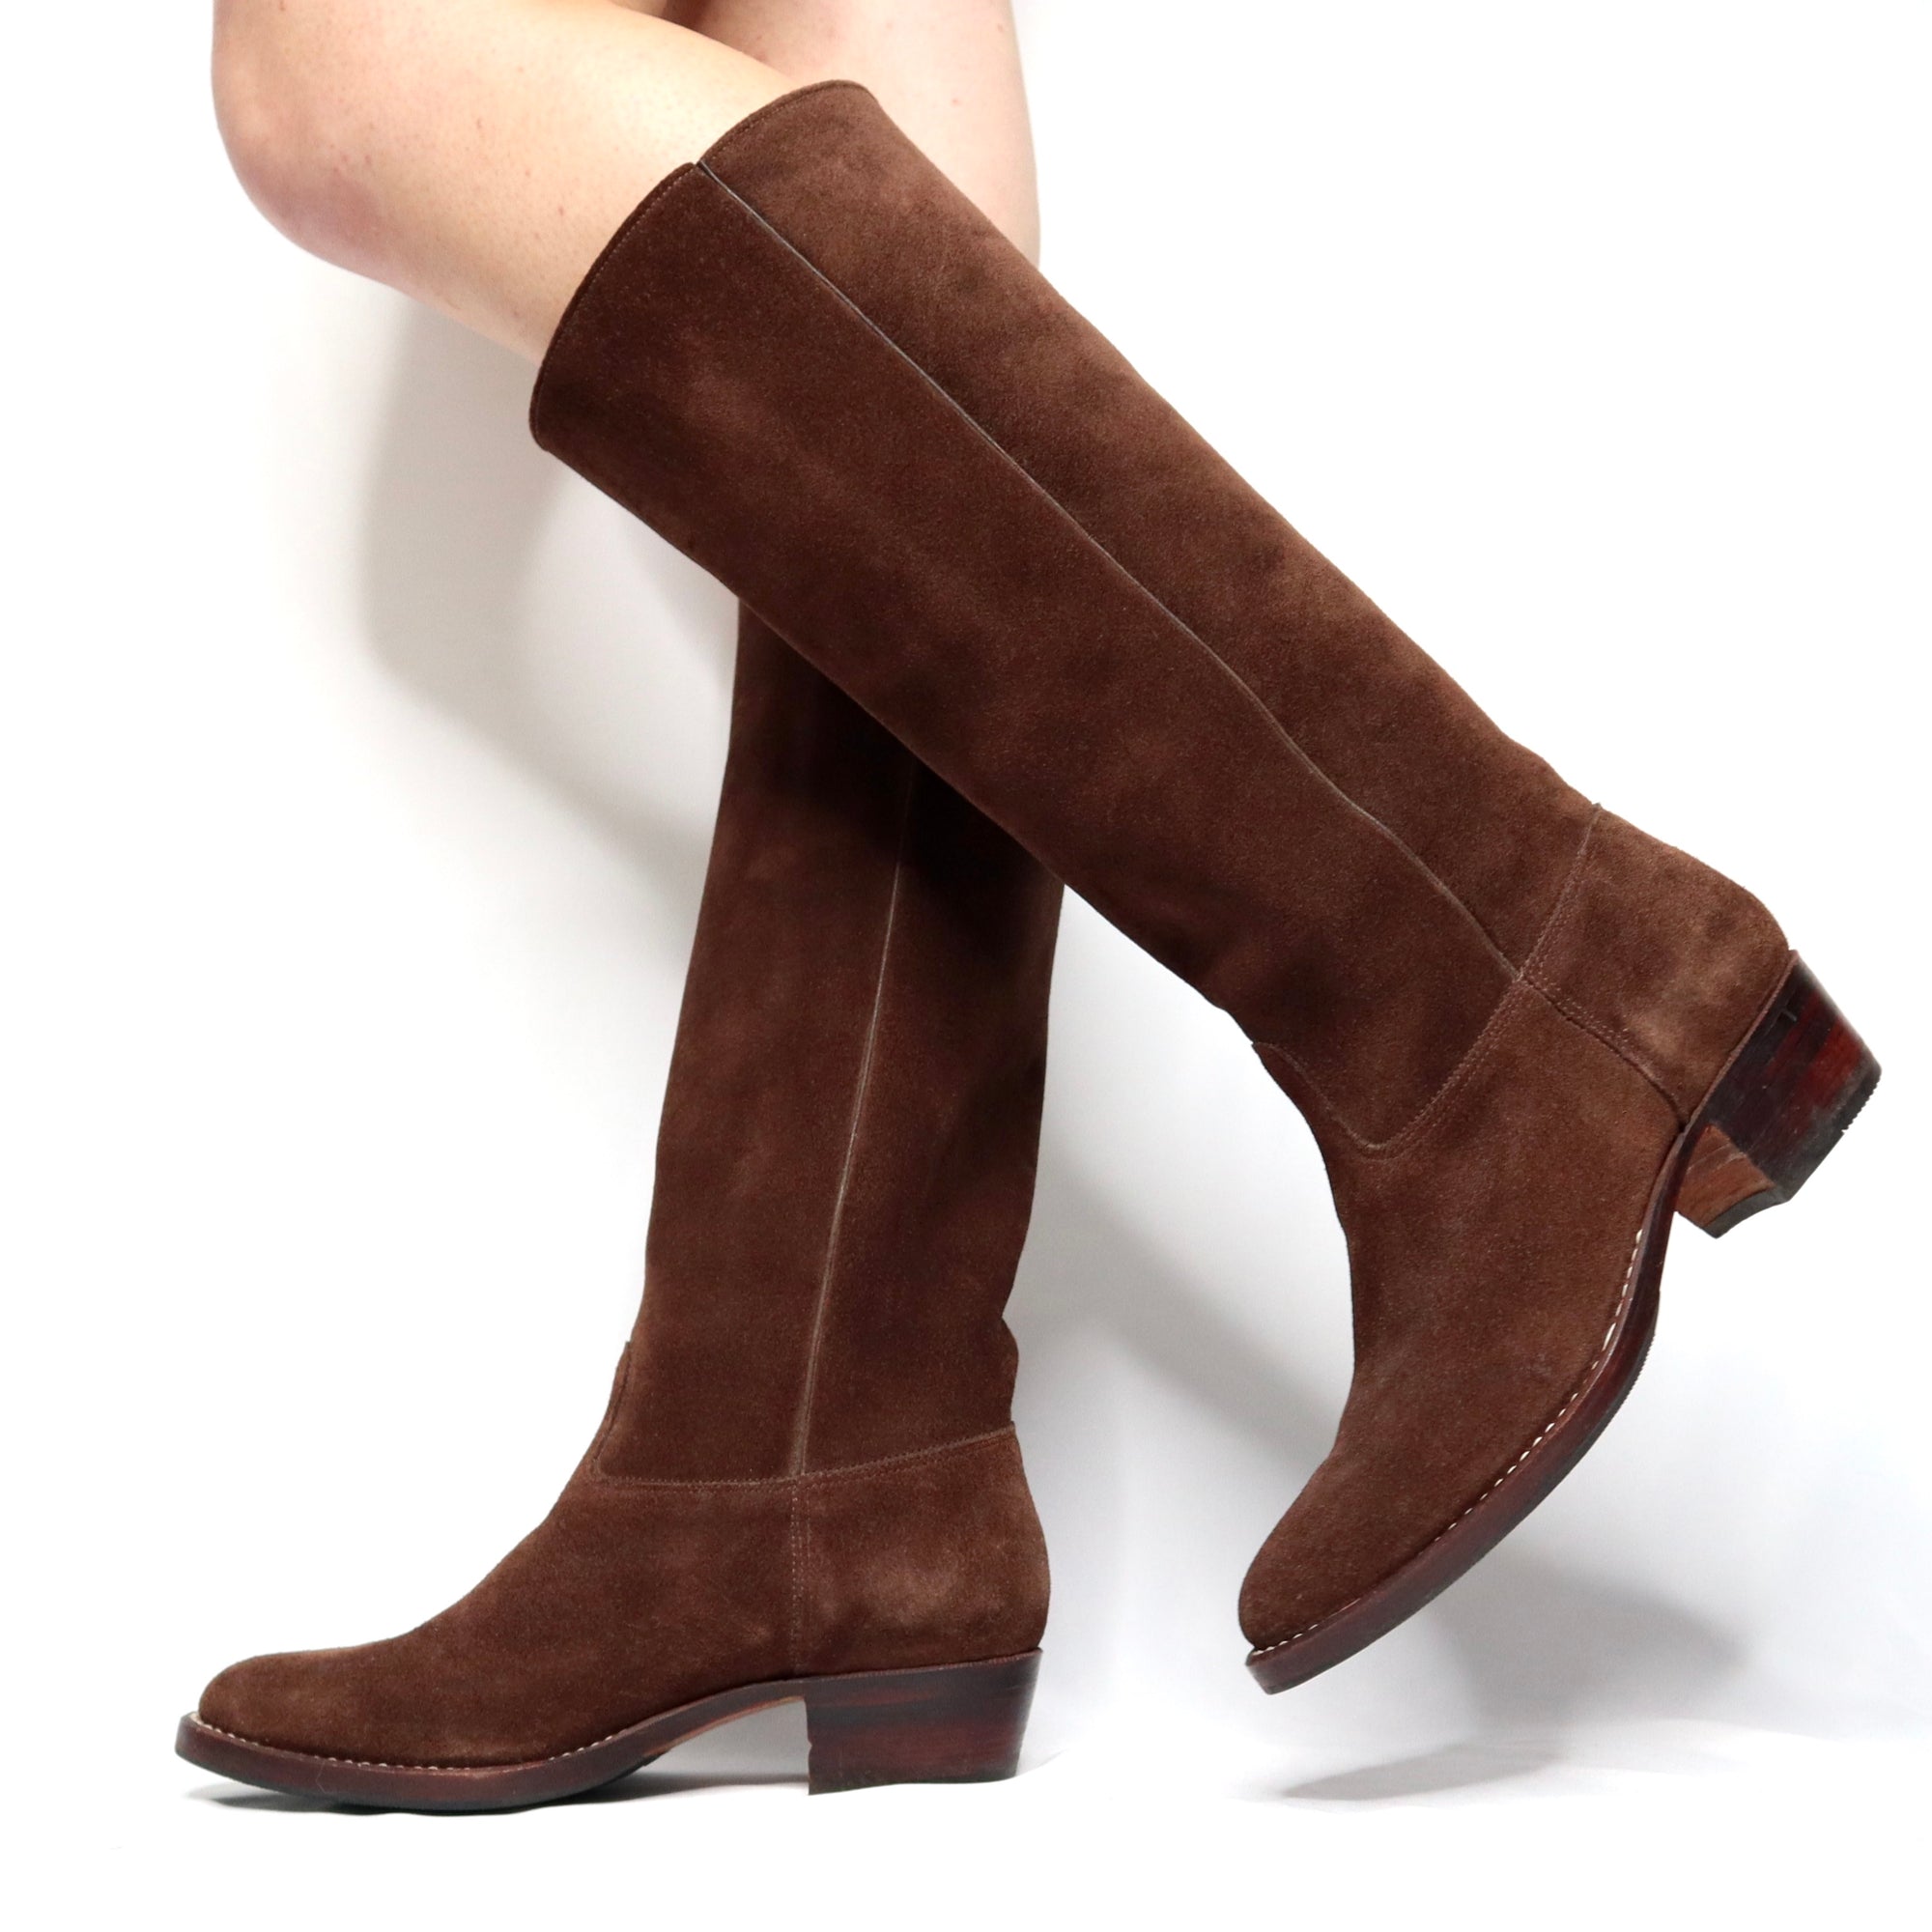 Vintage 90s Chocolate Brown Suede Knee High Boots